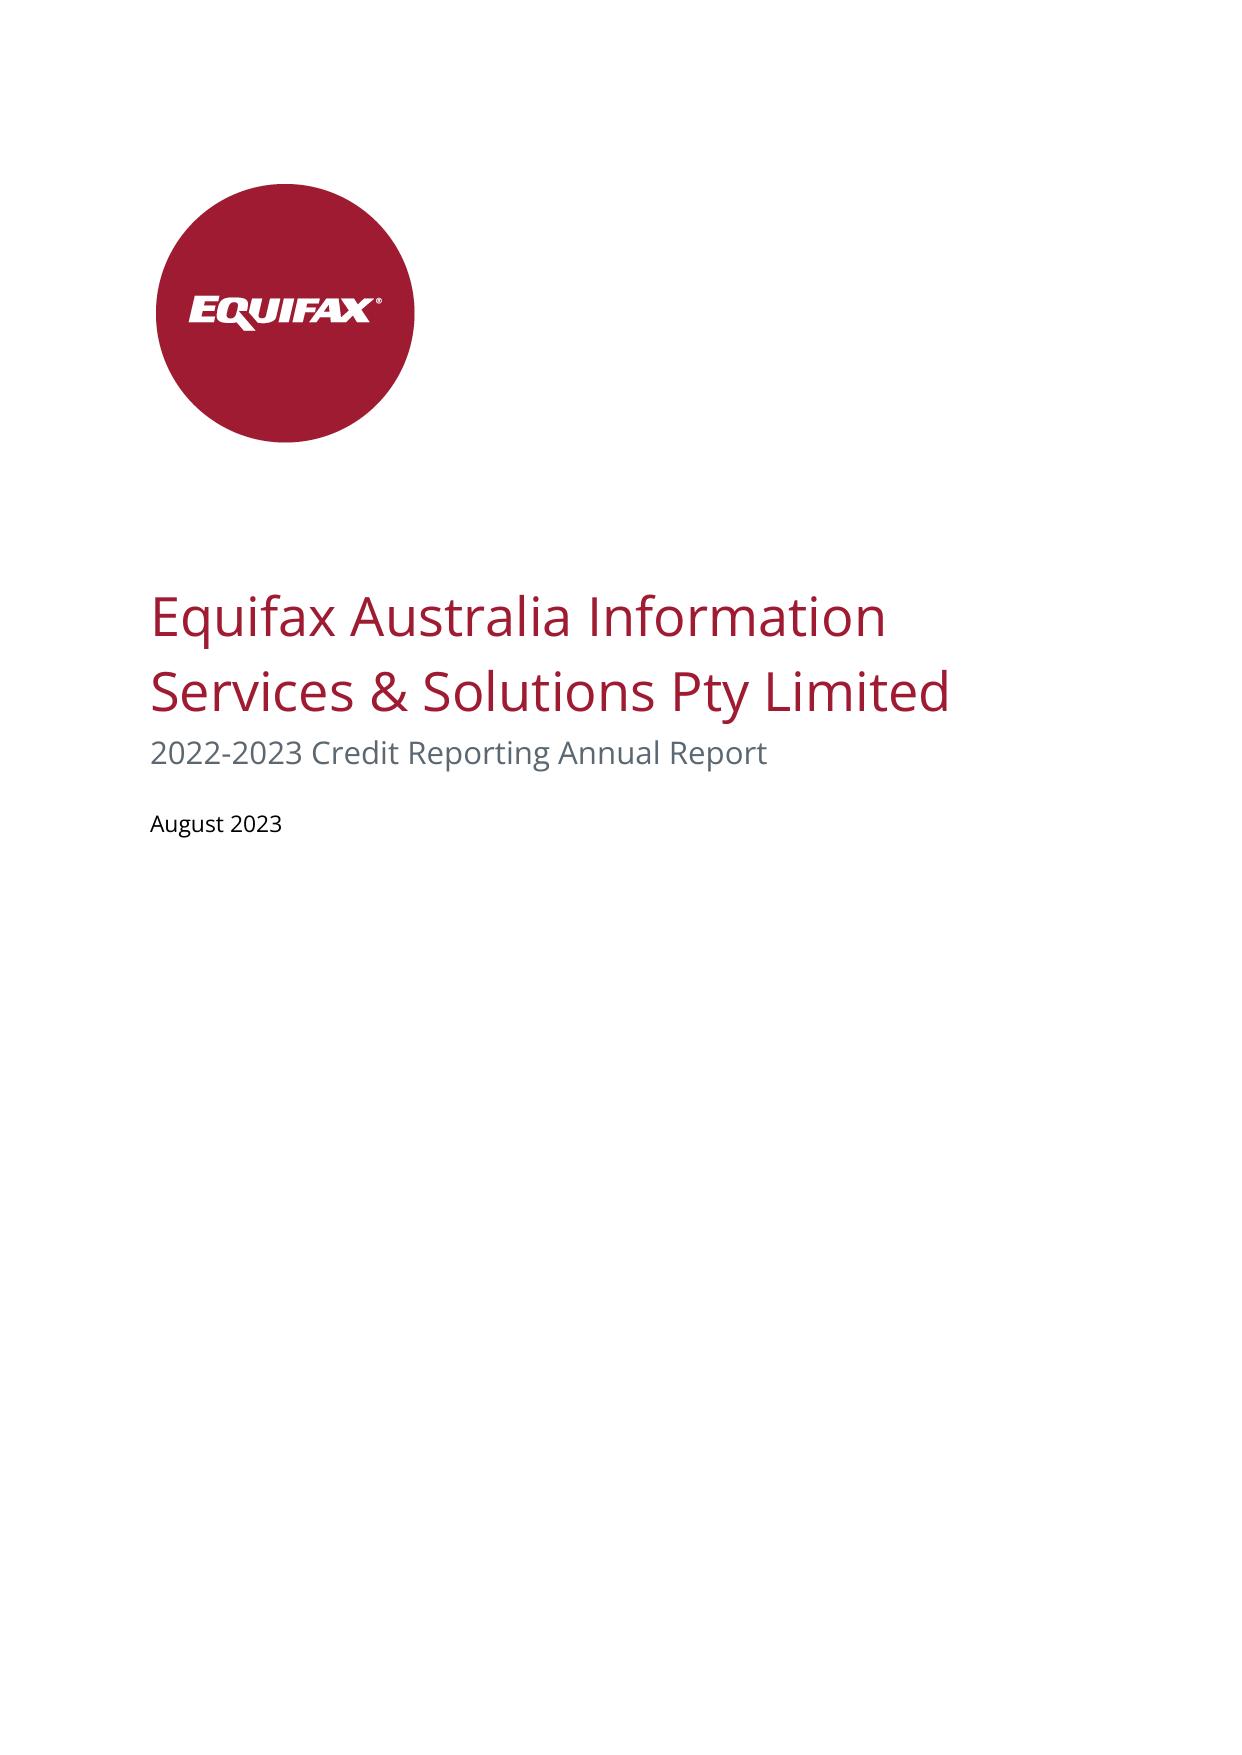 EQUIFAX 2023 Annual Report